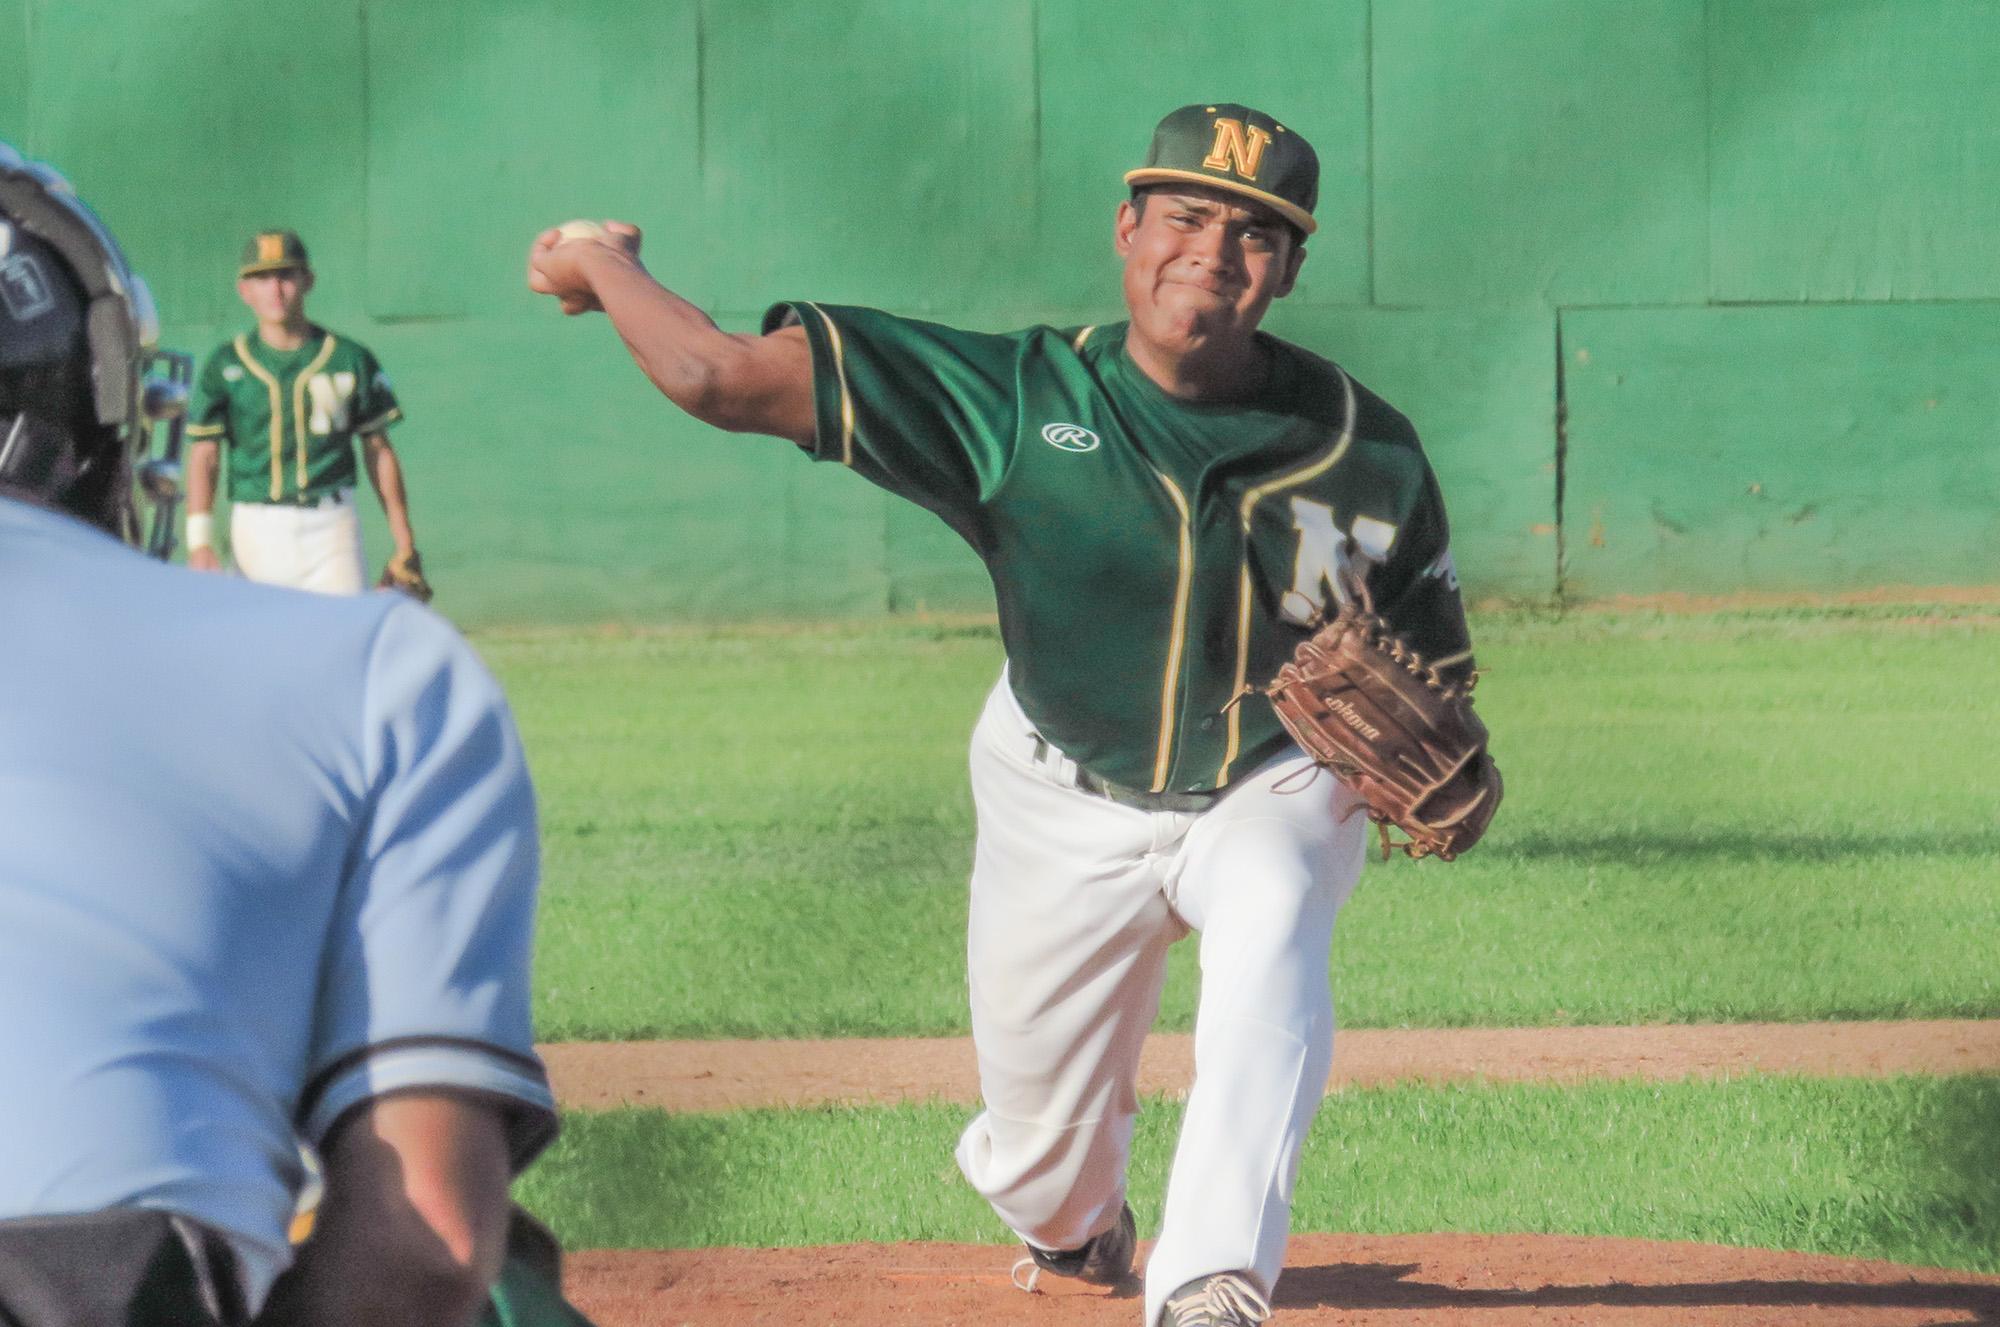 Shorthanded Mustangs lose at home 10-3 to Rio Grande City - Laredo Morning Times